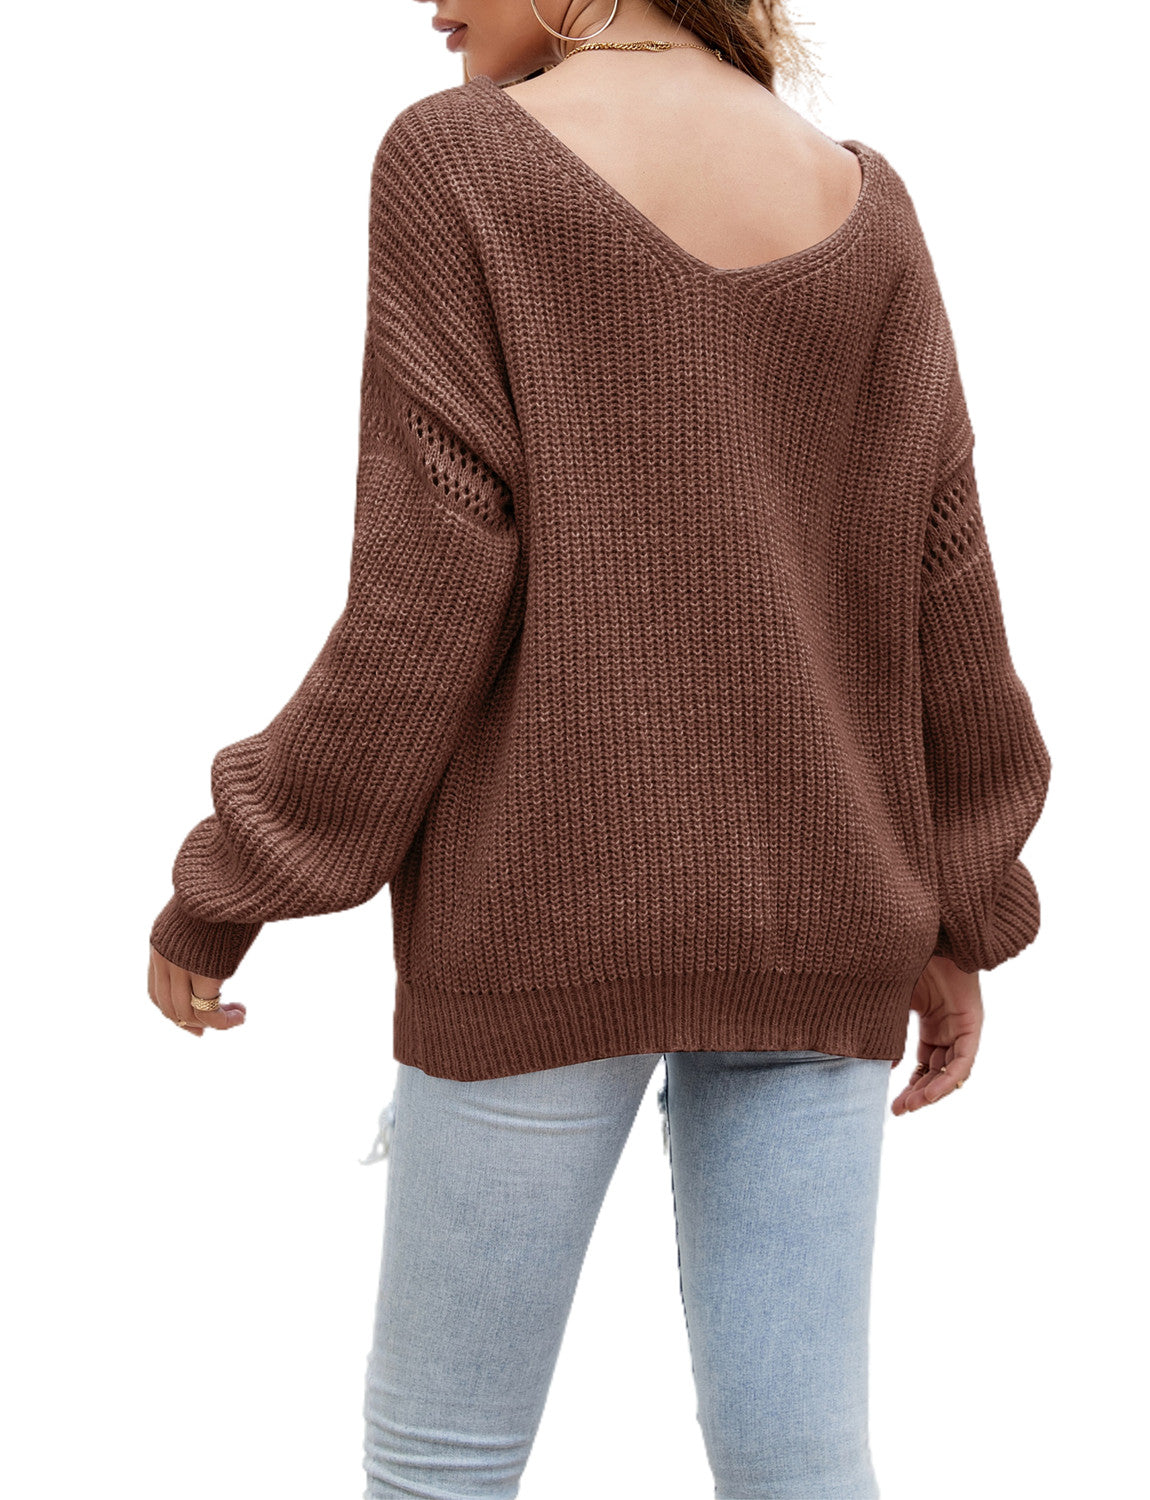 Women's Oversize Classic Pullover Sweater Loose Casual Long Sleeve Large V-neck Top